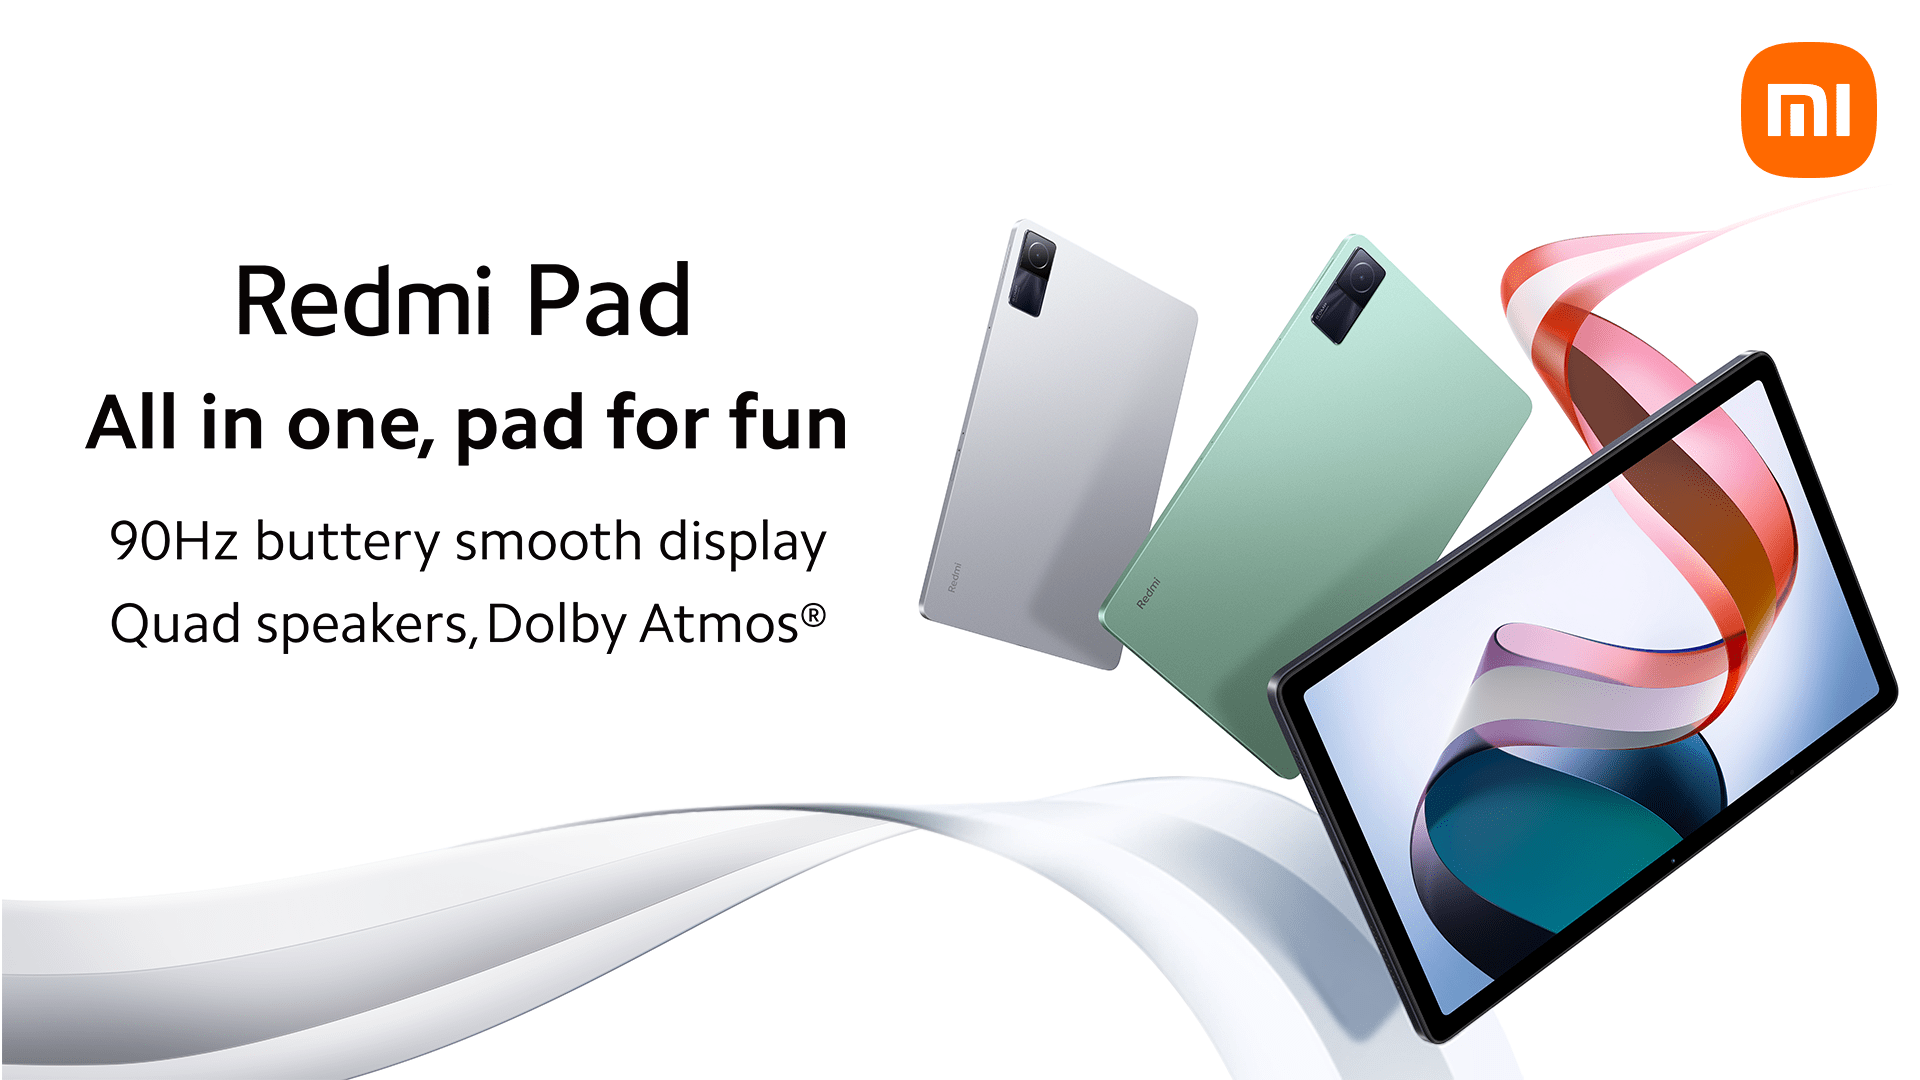 The Redmi Pad – An all in one pad for fun launched in Pakistan